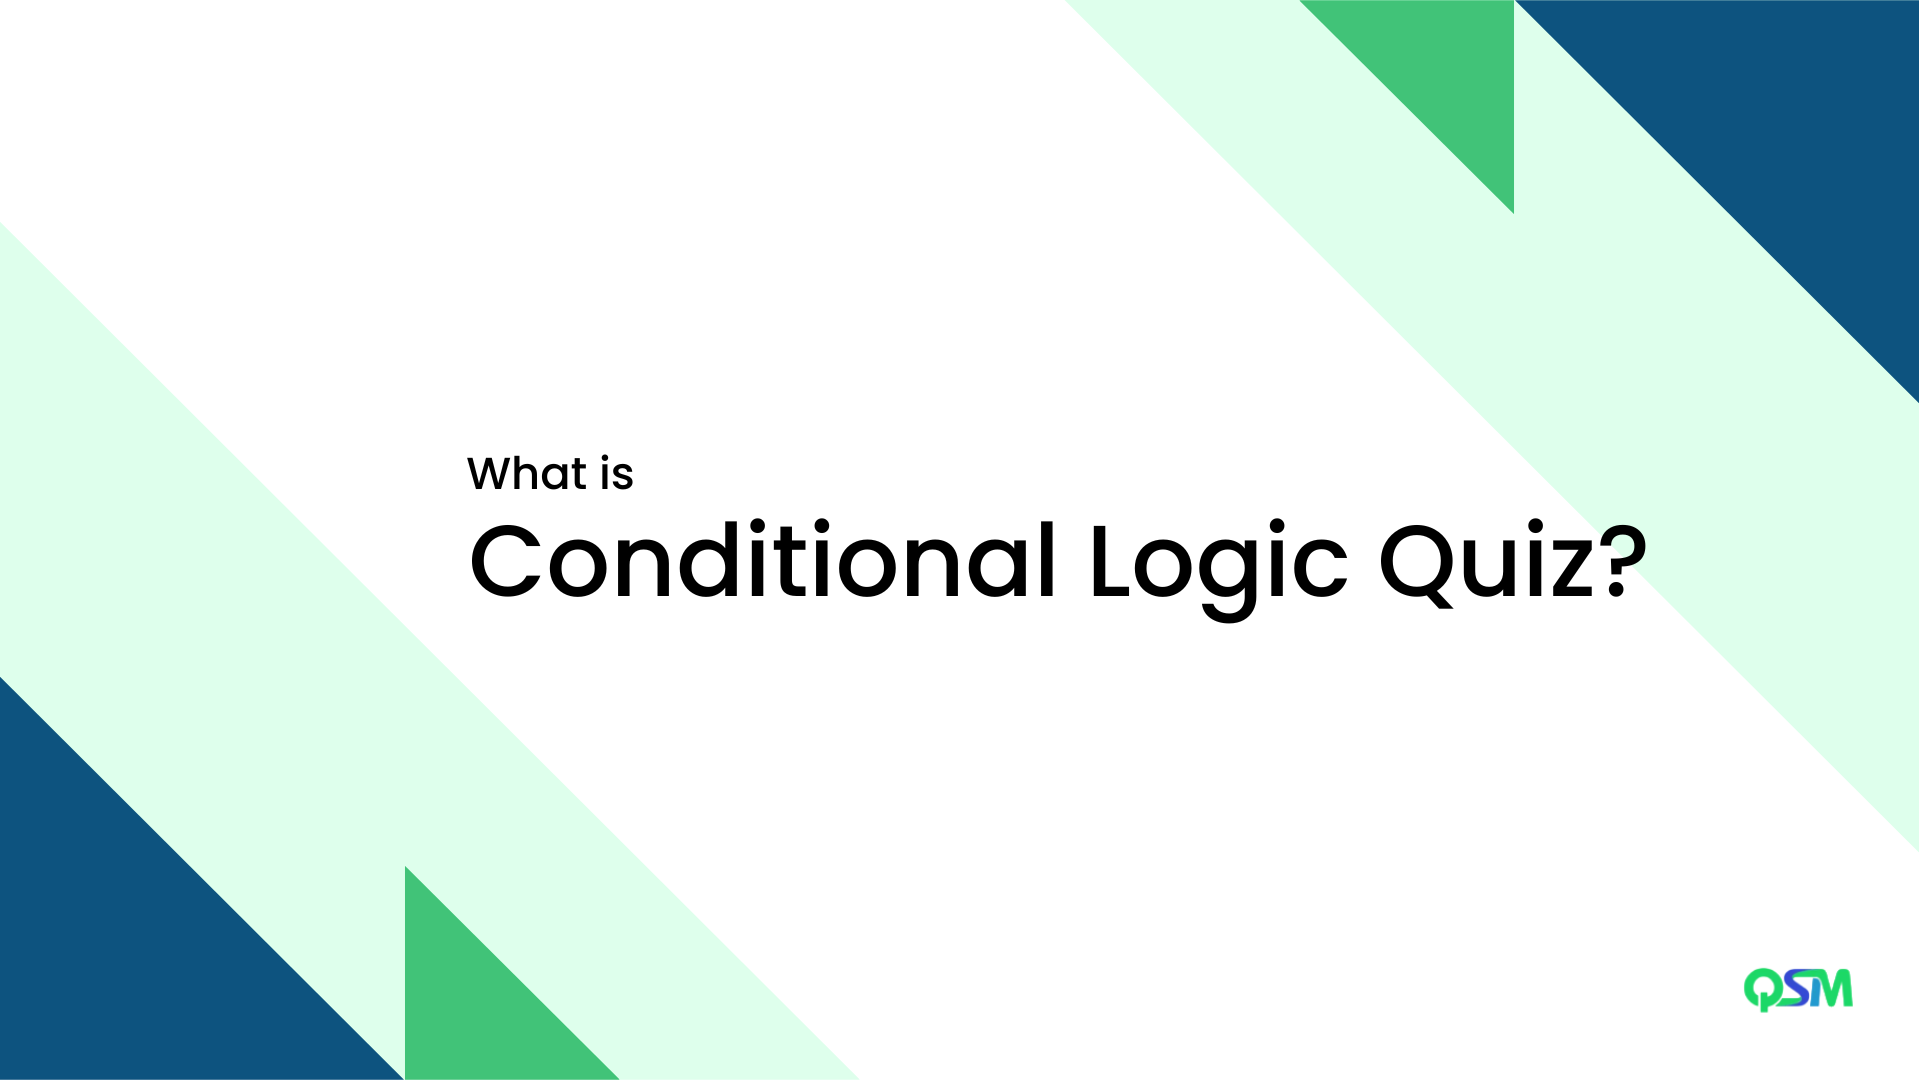 What is a Conditional Logic Quiz?